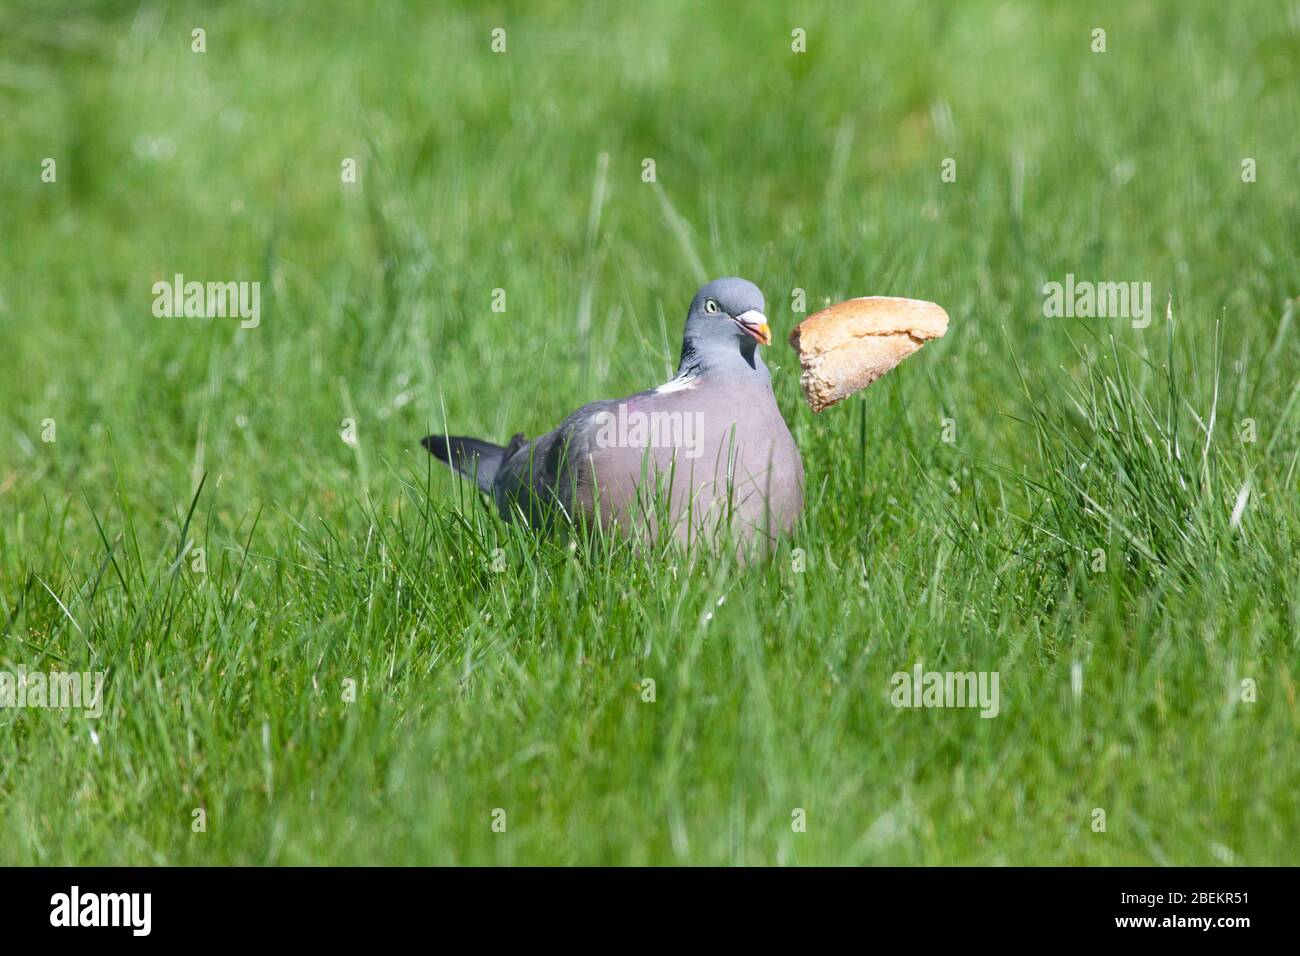 London, UK, 14 April 2020: on a cold but sunny day a wood peigeon on a lawn flings a crust of bread around as it attempts to eat it. The coronavirus lockdown means less scrap food is available for feral birds and animals used to living off rich pickings in the city. Credit: Anna Watson/Alamy Live News Stock Photo